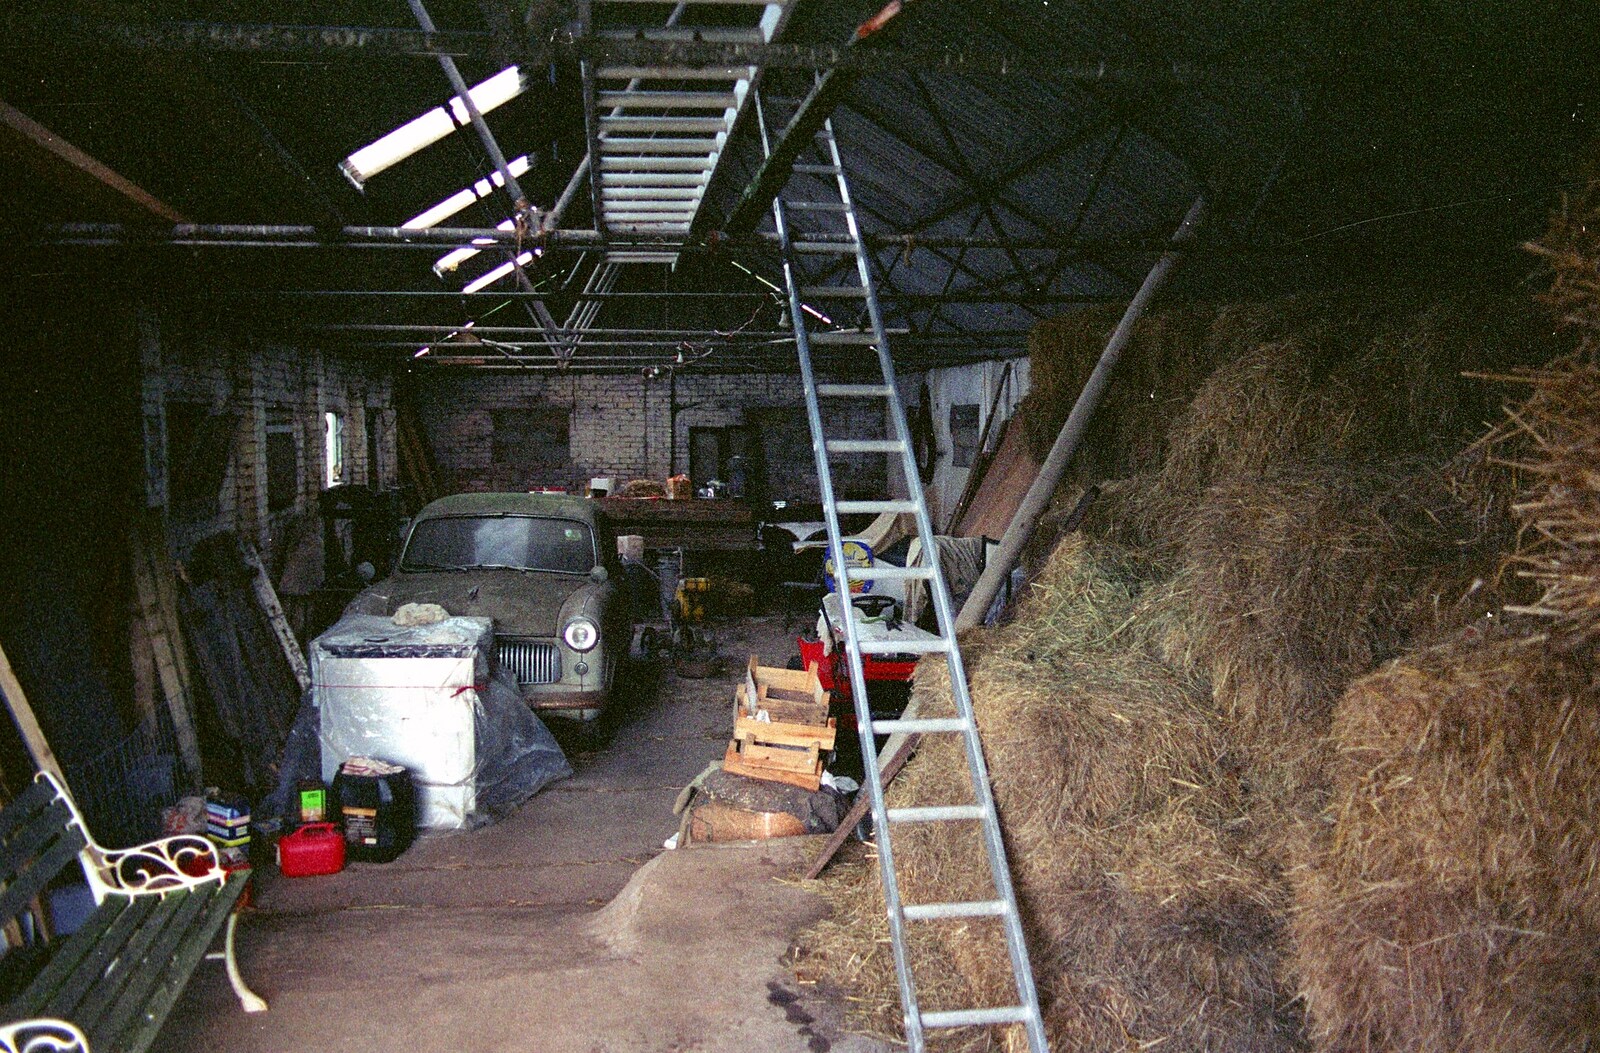 Another view of the shed from Uni: A Dinner Party, Harbertonford and Buckfastleigh, Devon - 24th December 1988